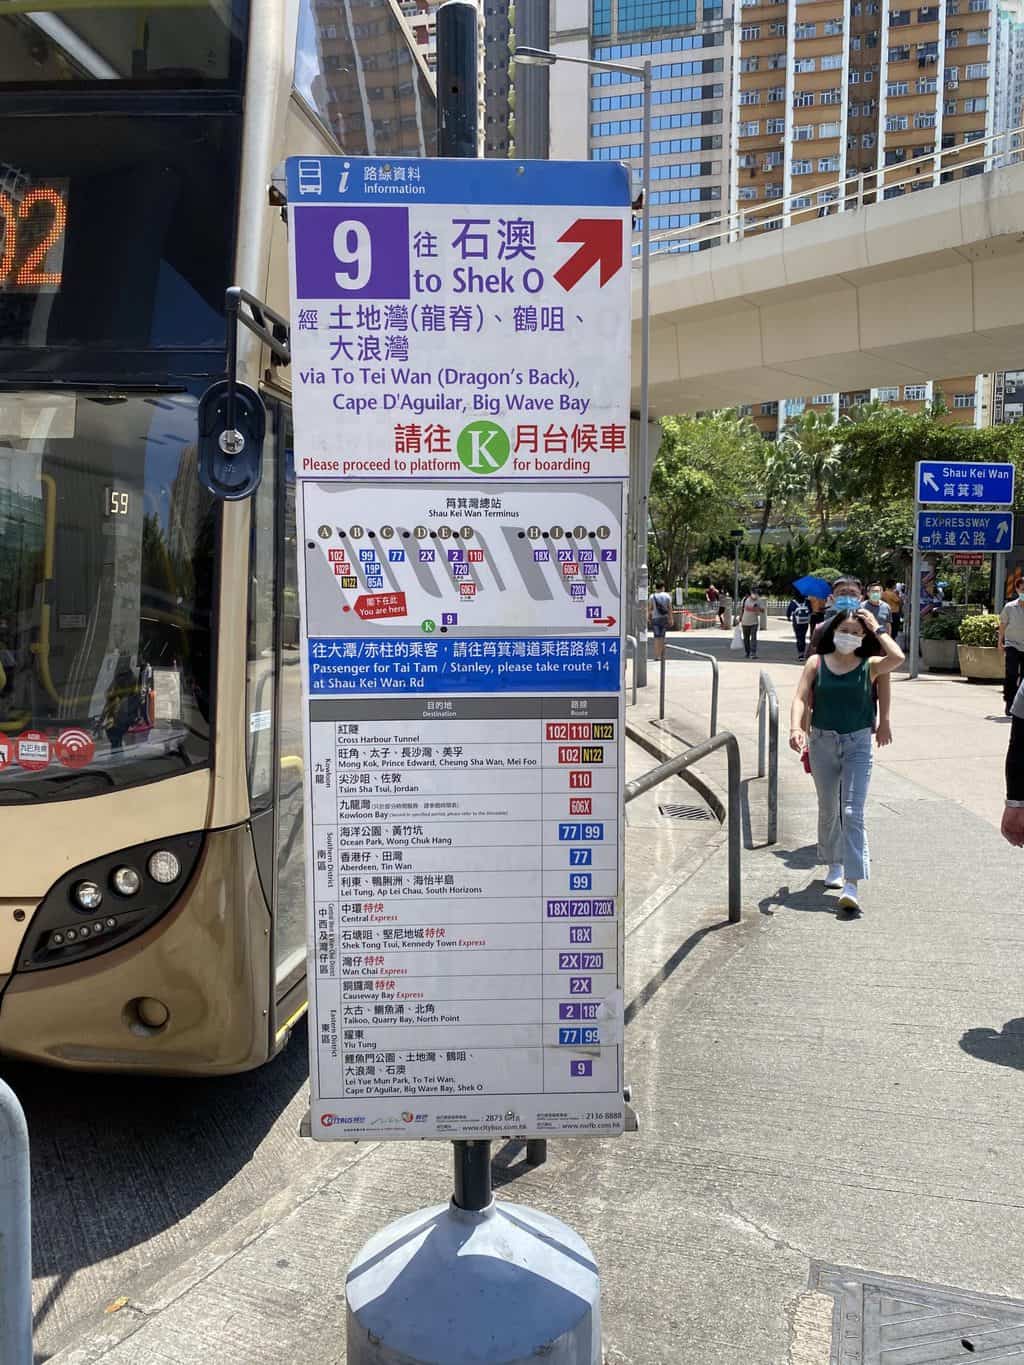 List of Buses at the Bus station